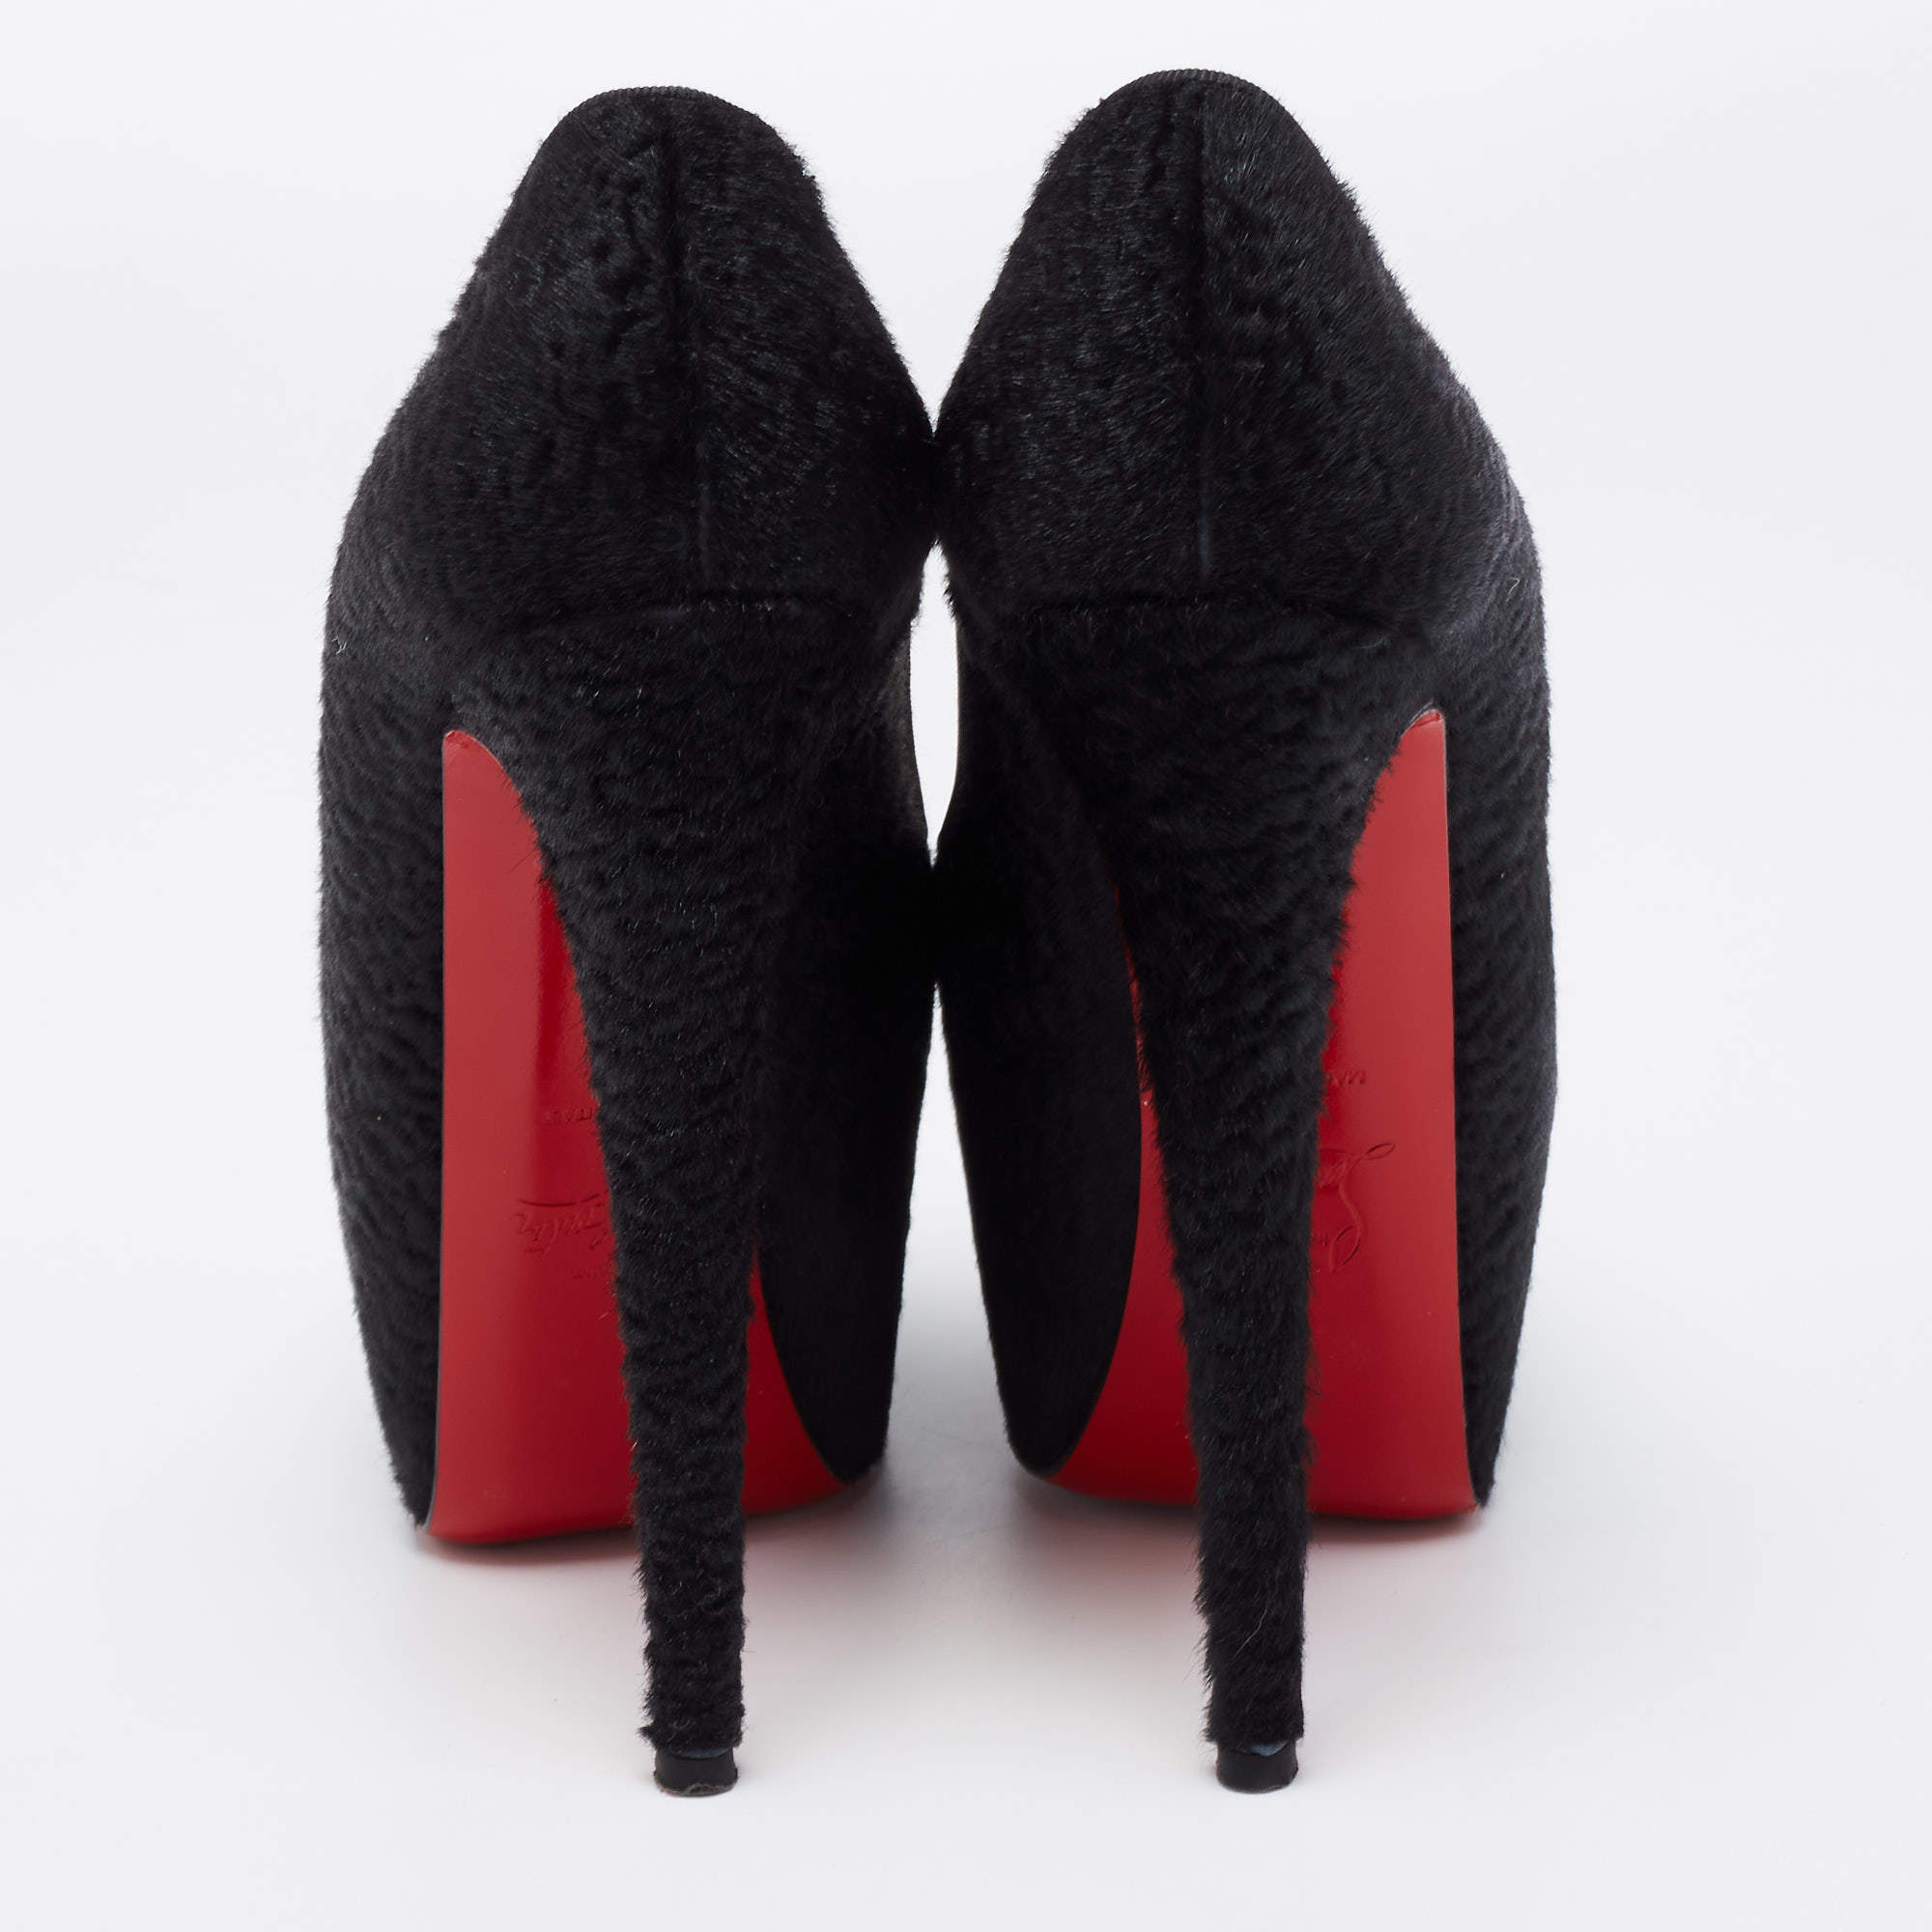 How Much Are Louis Vuitton Black Heels With Red Bottoms